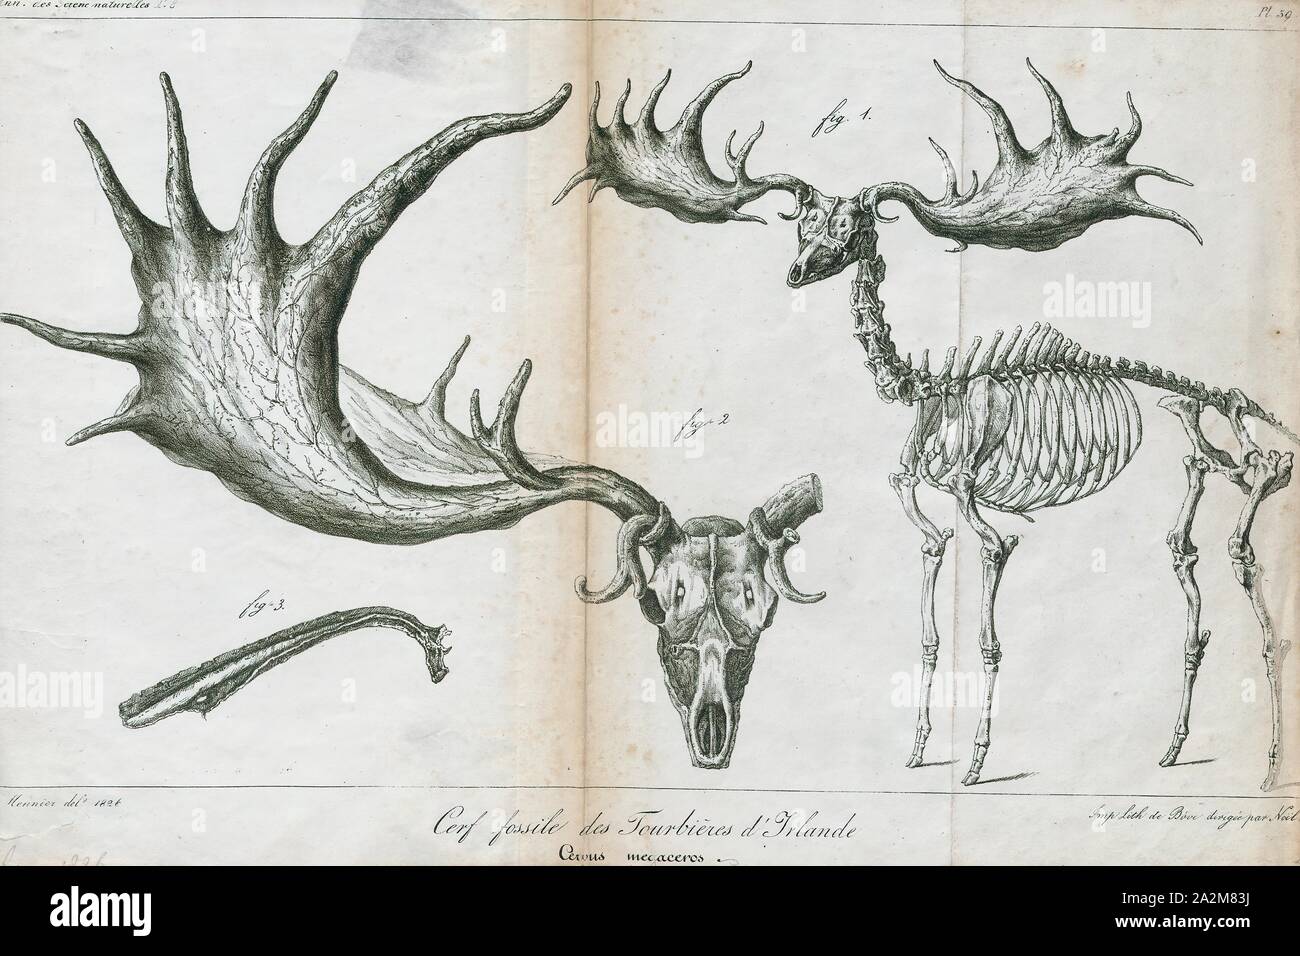 Cervus megaceros, Print, The Irish elk (Megaloceros giganteus) also called the giant deer or Irish giant deer, is an extinct species of deer in the genus Megaloceros and is one of the largest deer that ever lived. Its range extended across Eurasia during the Pleistocene, from Ireland to Siberia to China. A related form is recorded in China during the Late Pleistocene. The most recent remains of the species have been carbon dated to about 7, 700 years ago in Siberia., skeleton Stock Photo